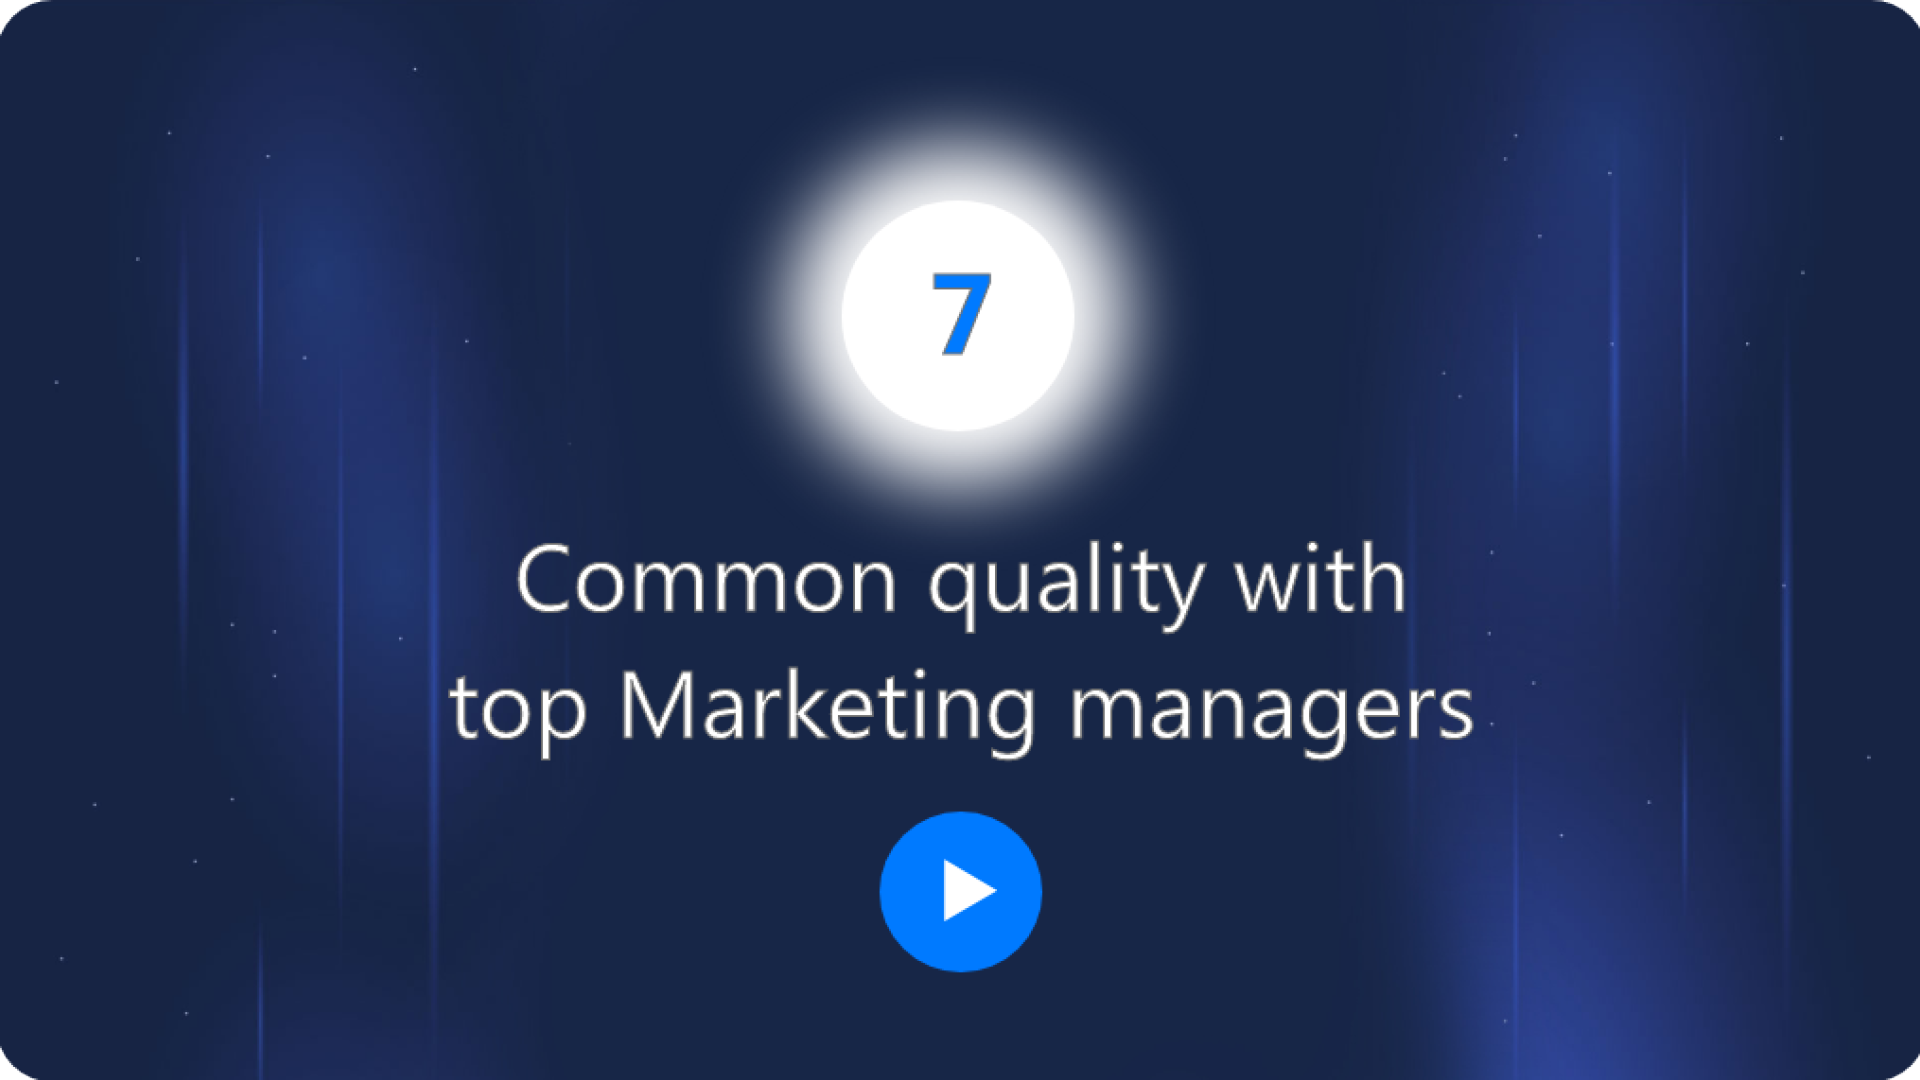 Common quality with top Marketing managers